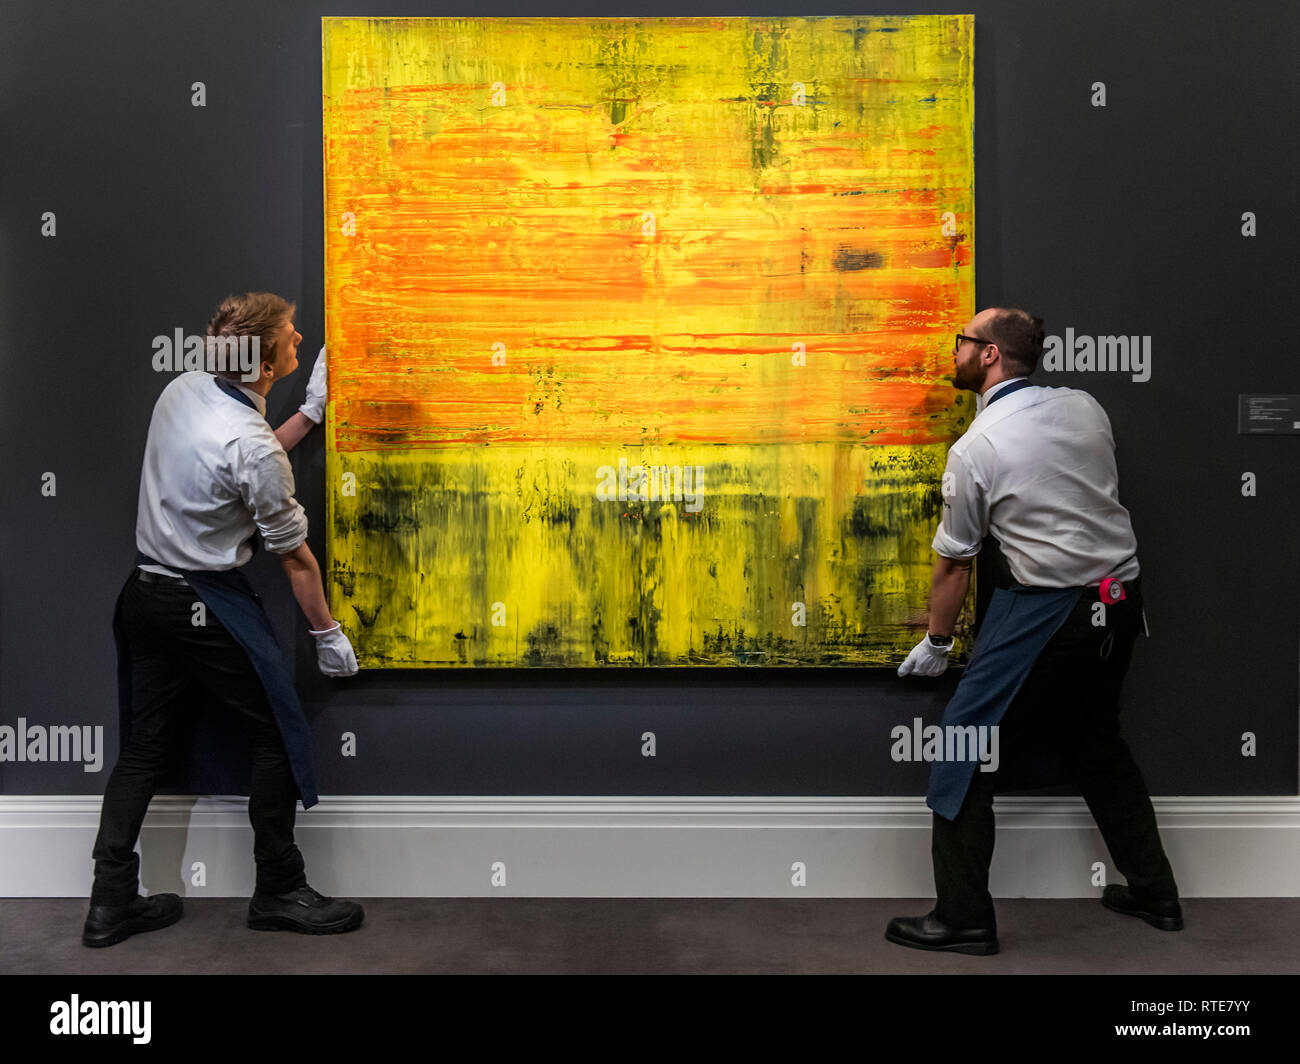 London, UK. 1st Mar 2019. Gerhard Richter, Abstraktes Bild, 2009, Est. £6,000,000-8,000,000 -  A preview ahead of the Sotheby’s Contemporary Art Evening Auction at Sotheby's New Bond Street, London. The auction will take place on 5 March. Credit: Guy Bell/Alamy Live News Stock Photo